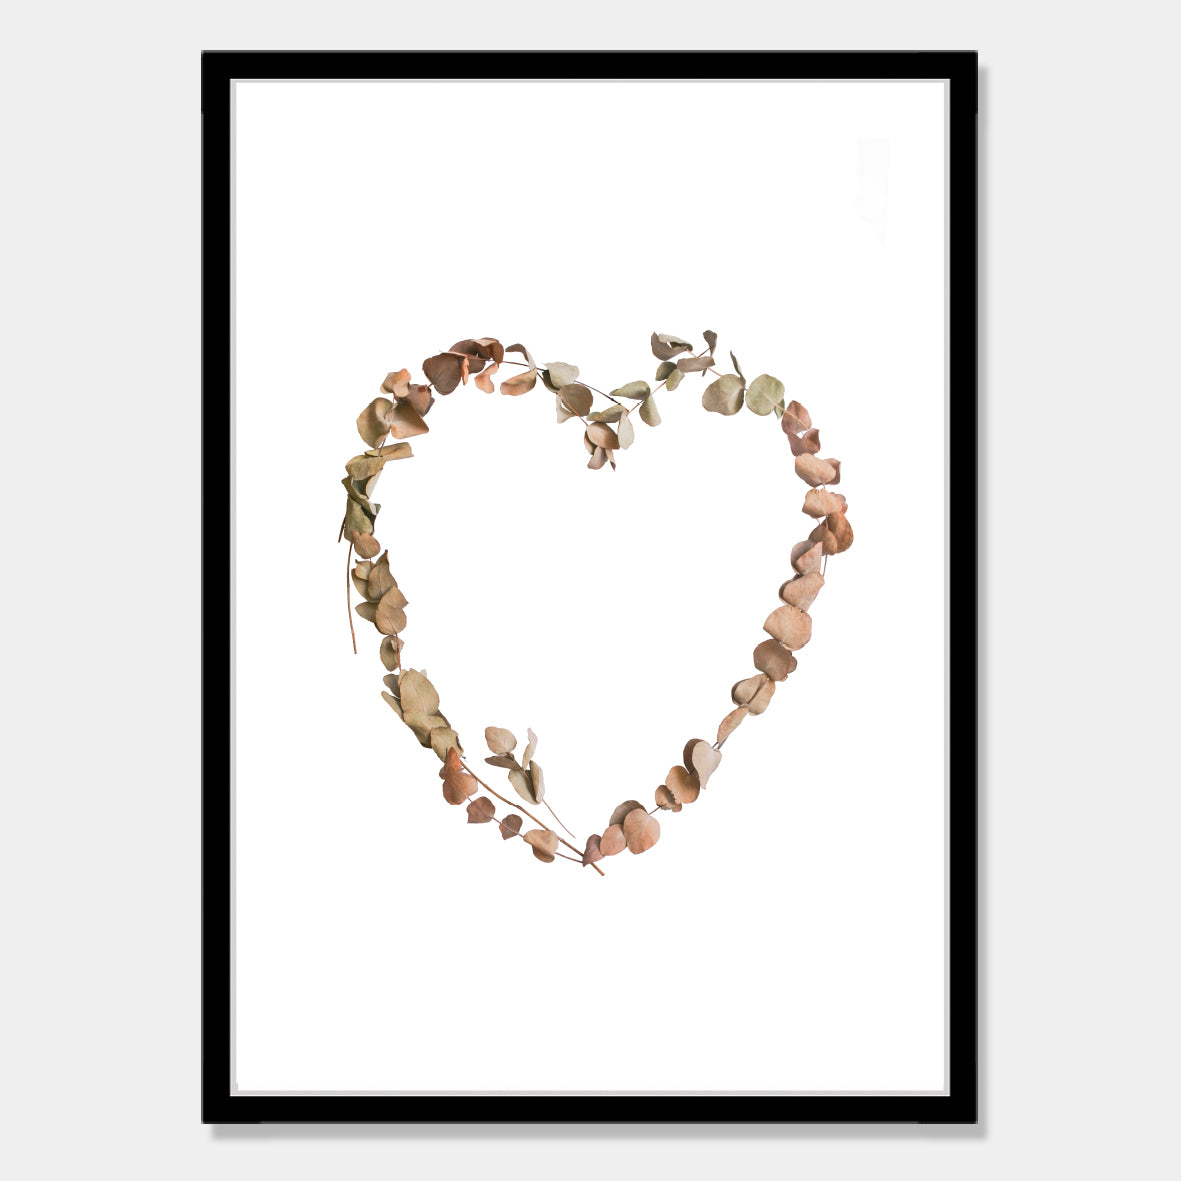 Photographic art print of dried leaves in a heart shape by Bon Jung. Printed in New Zealand by endemicworld and framed in black.